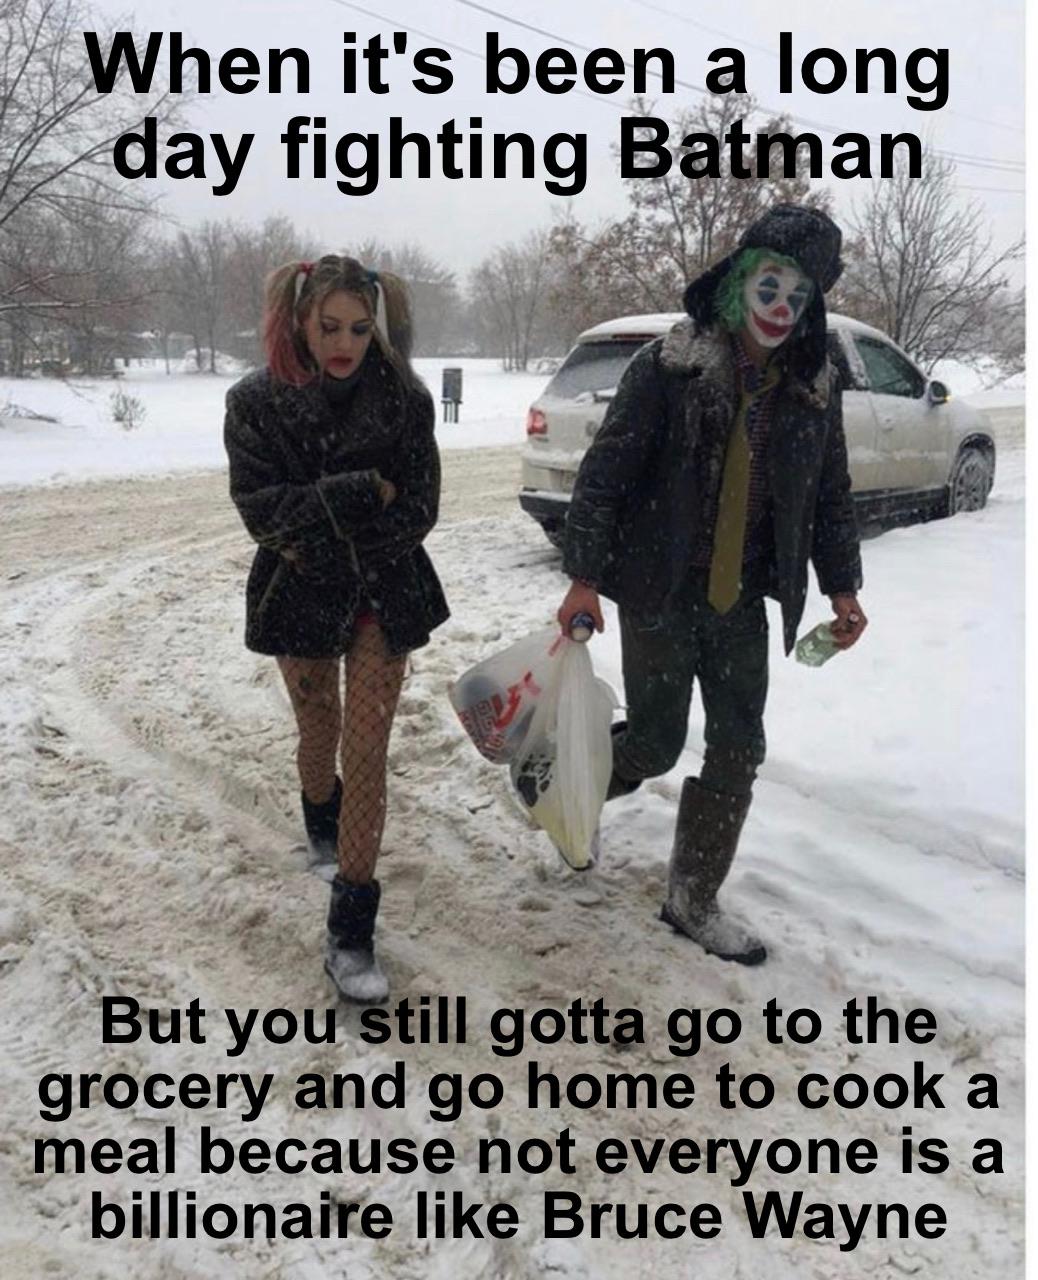 Harley Quinn - When it's been a long day fighting Batman But you still gotta go to the grocery and go home to cook a meal because not everyone is a billionaire Bruce Wayne